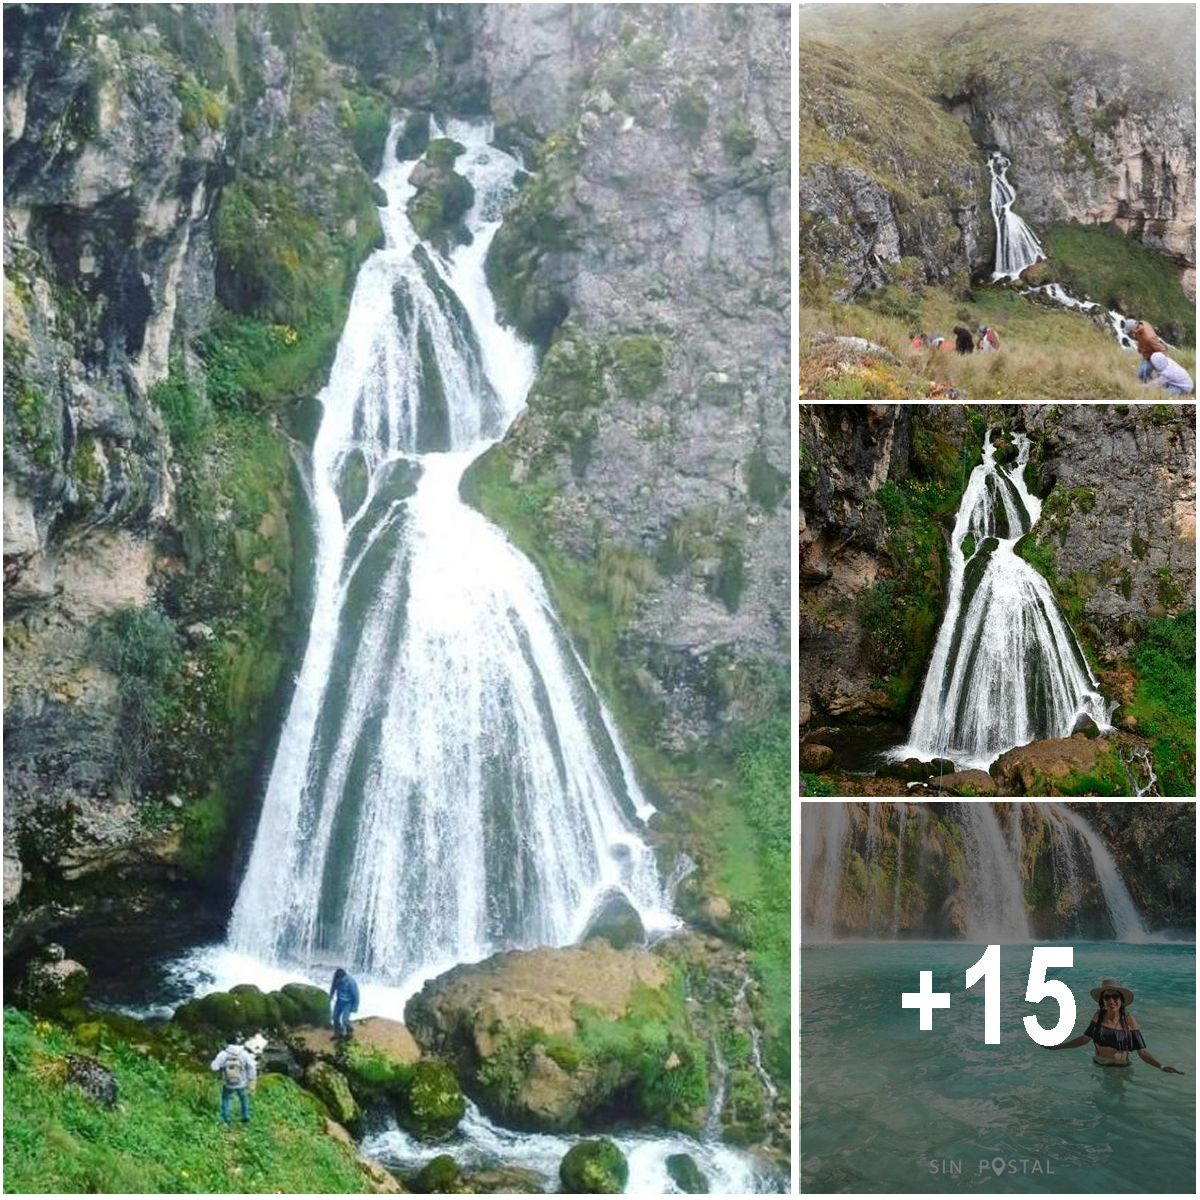 Recently Discovered Waterfall in Peru Looks Like a Bride Dressed in a Wedding Gown and Veil